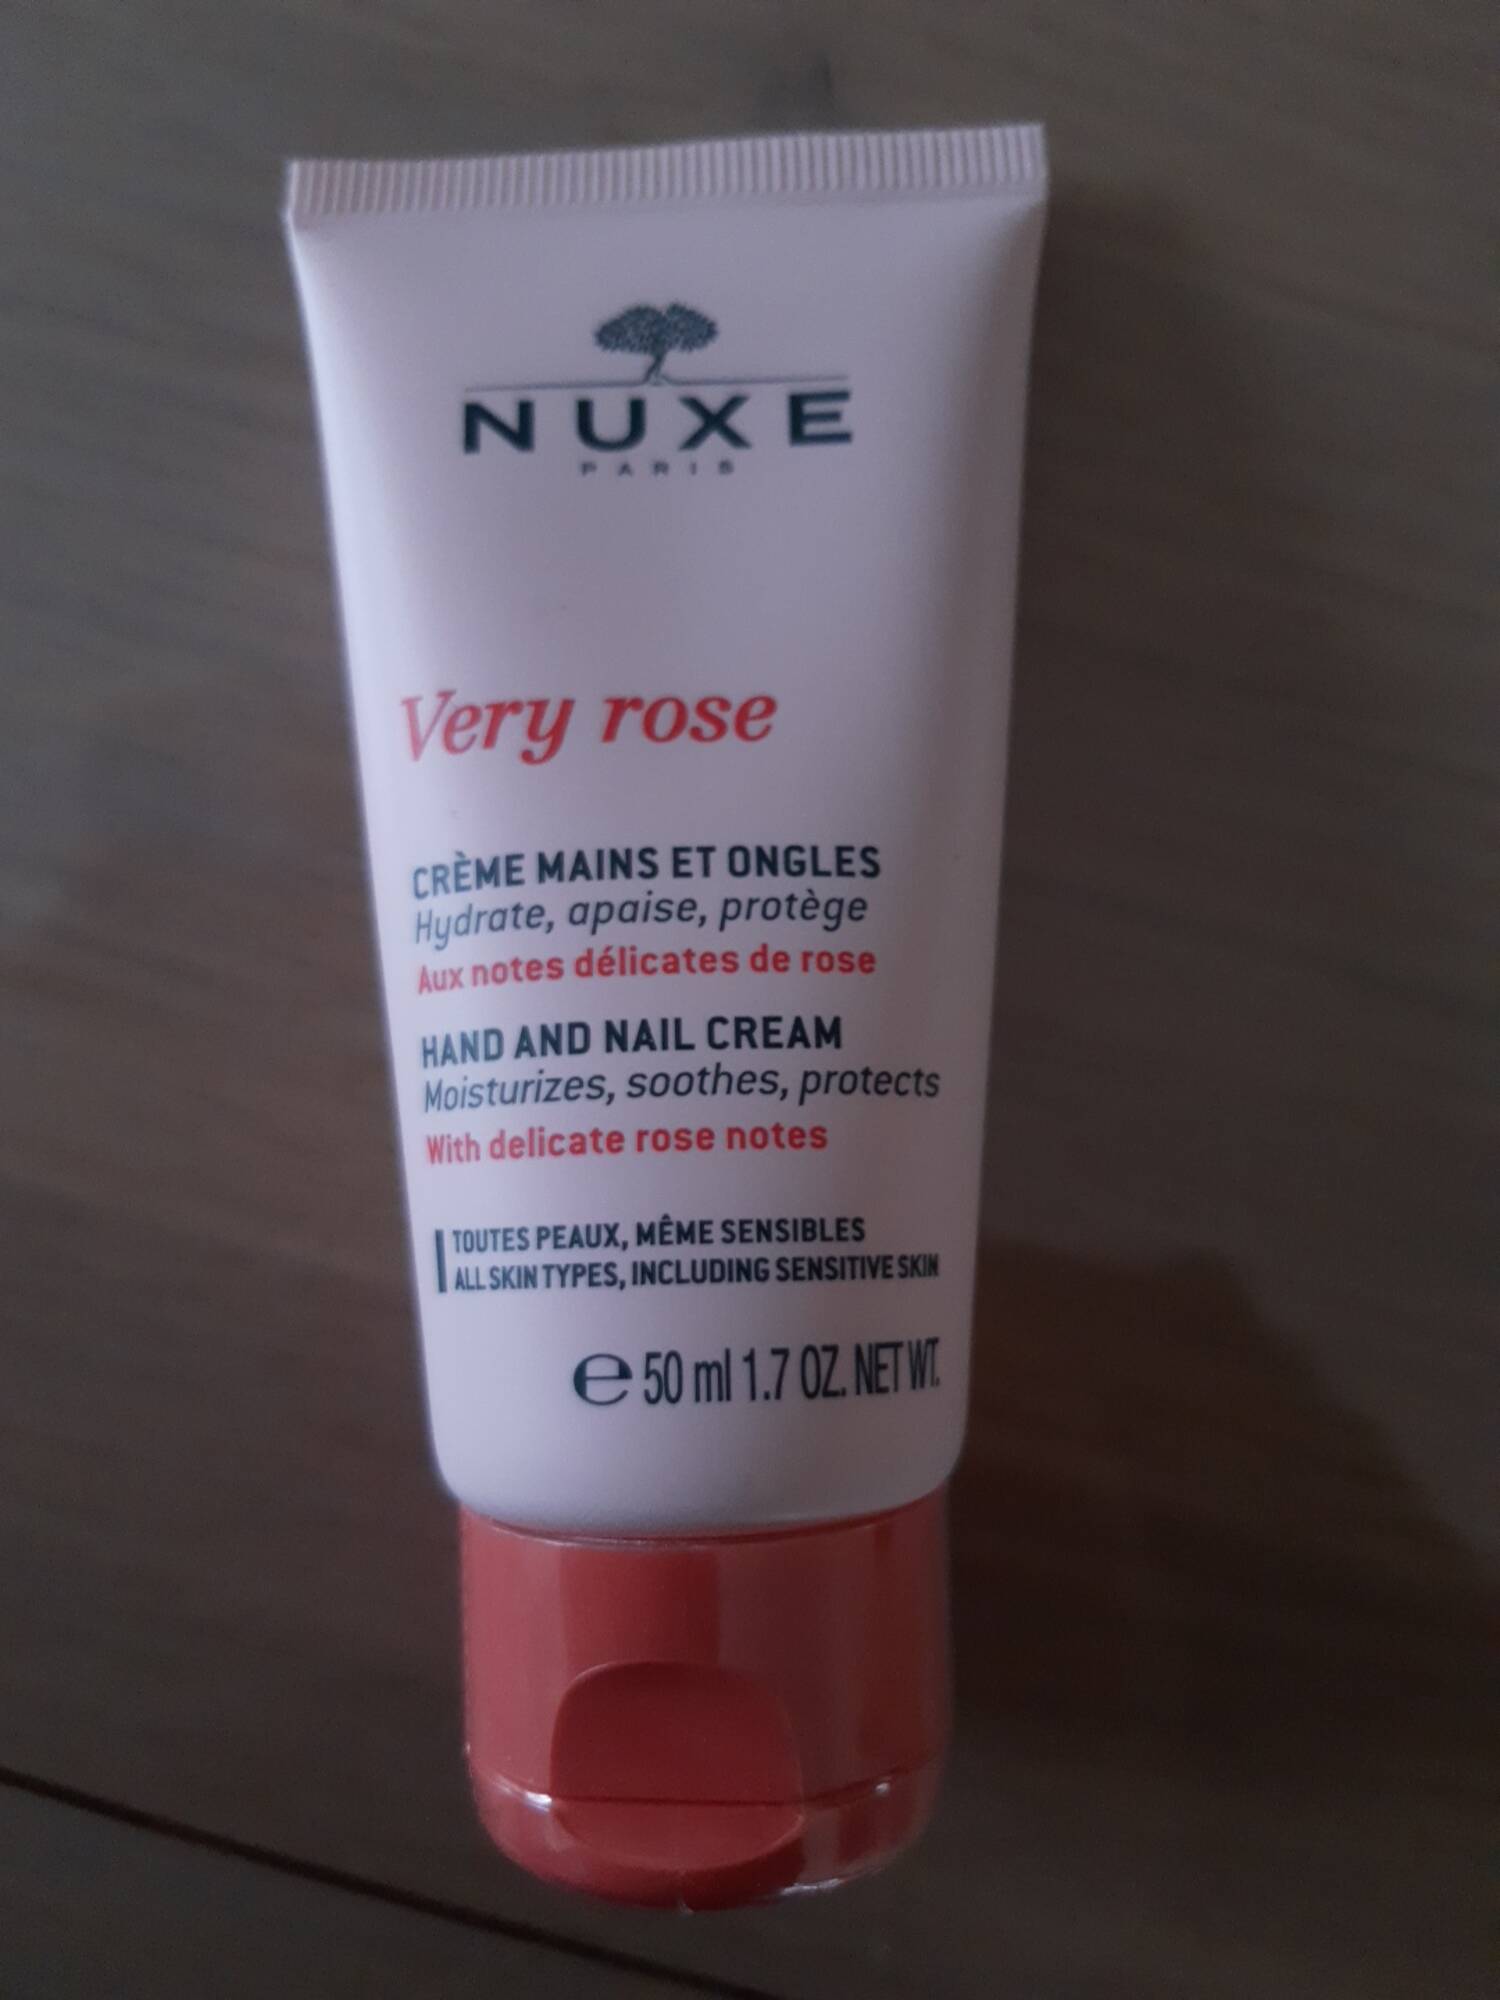 NUXE - Very rose - Crème mains et ongles